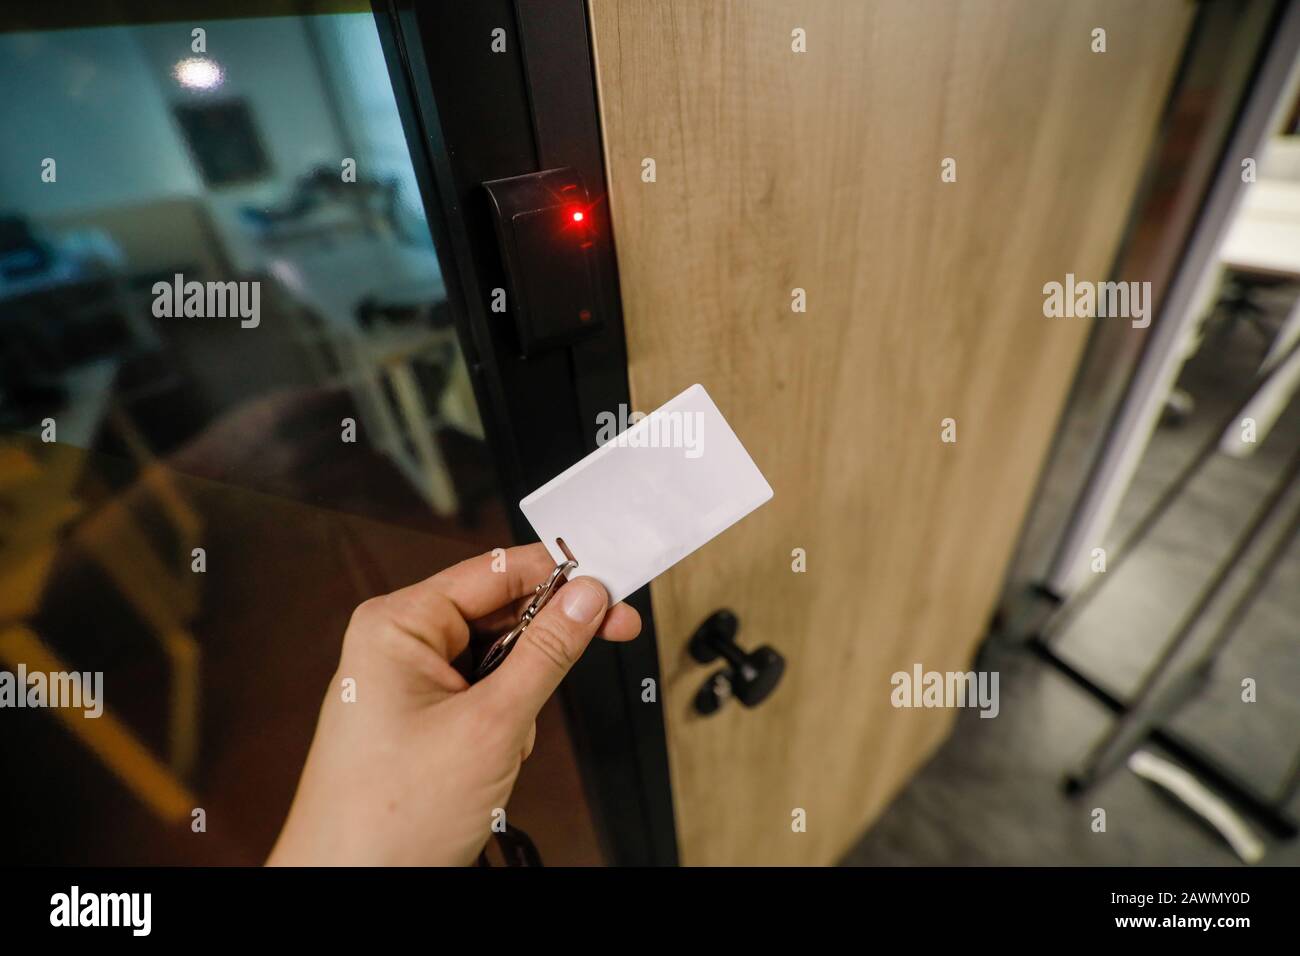 Shallow depth of field (selective focus) image with the hand of a man holding an access card inside an office building. Stock Photo